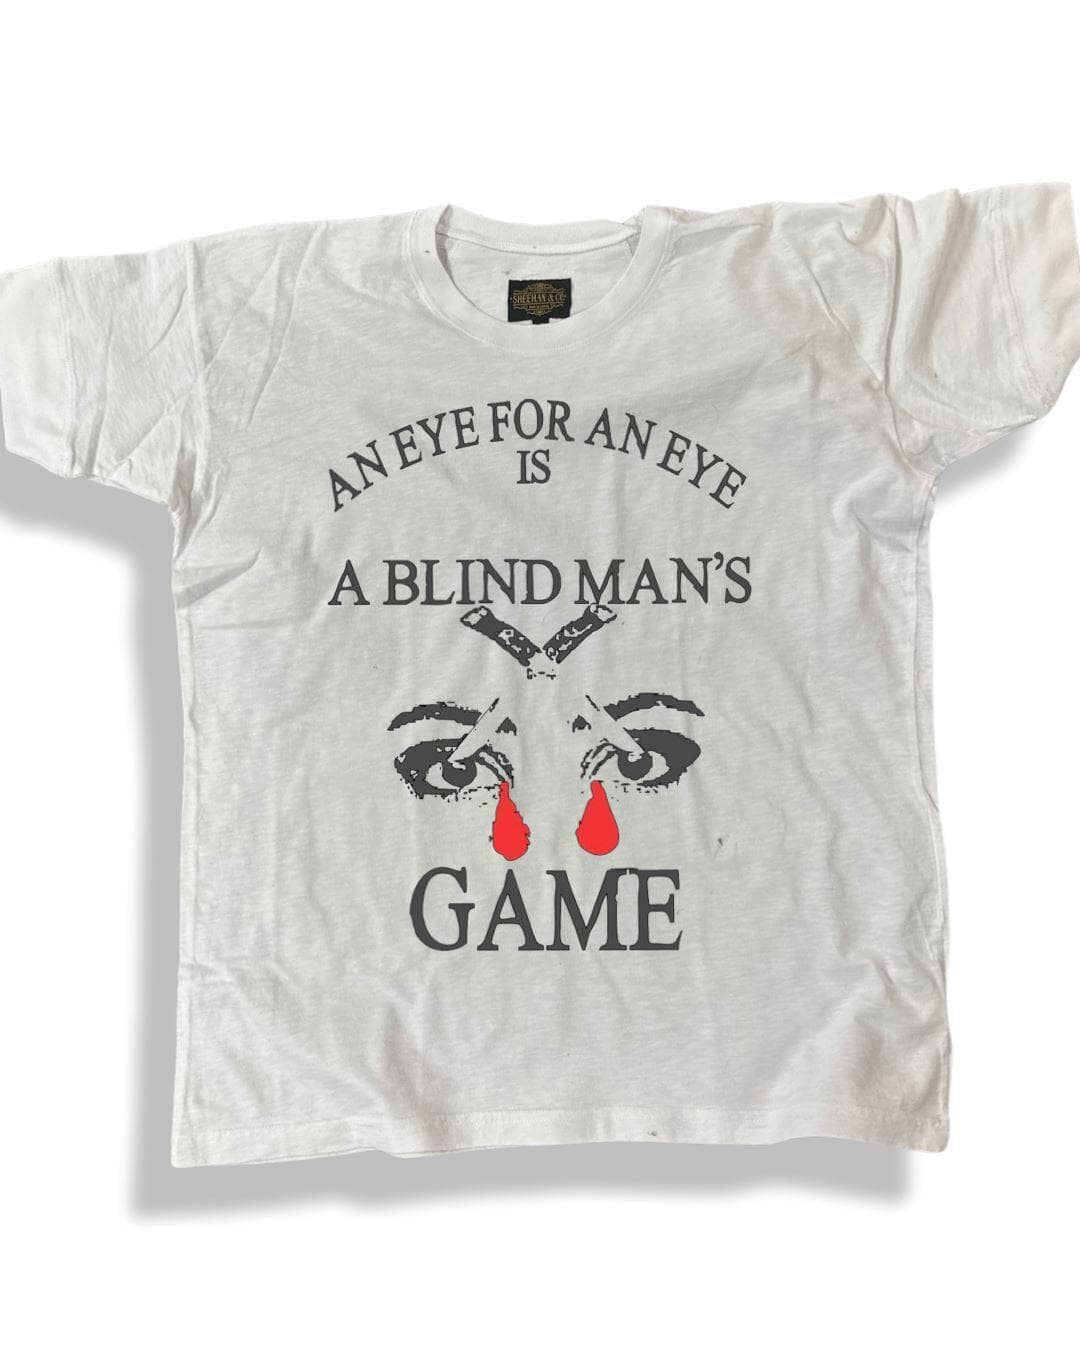 An Eye For An Eye Is A Blind Man's Game Statement Graphic Tee - Sheehan and Co.